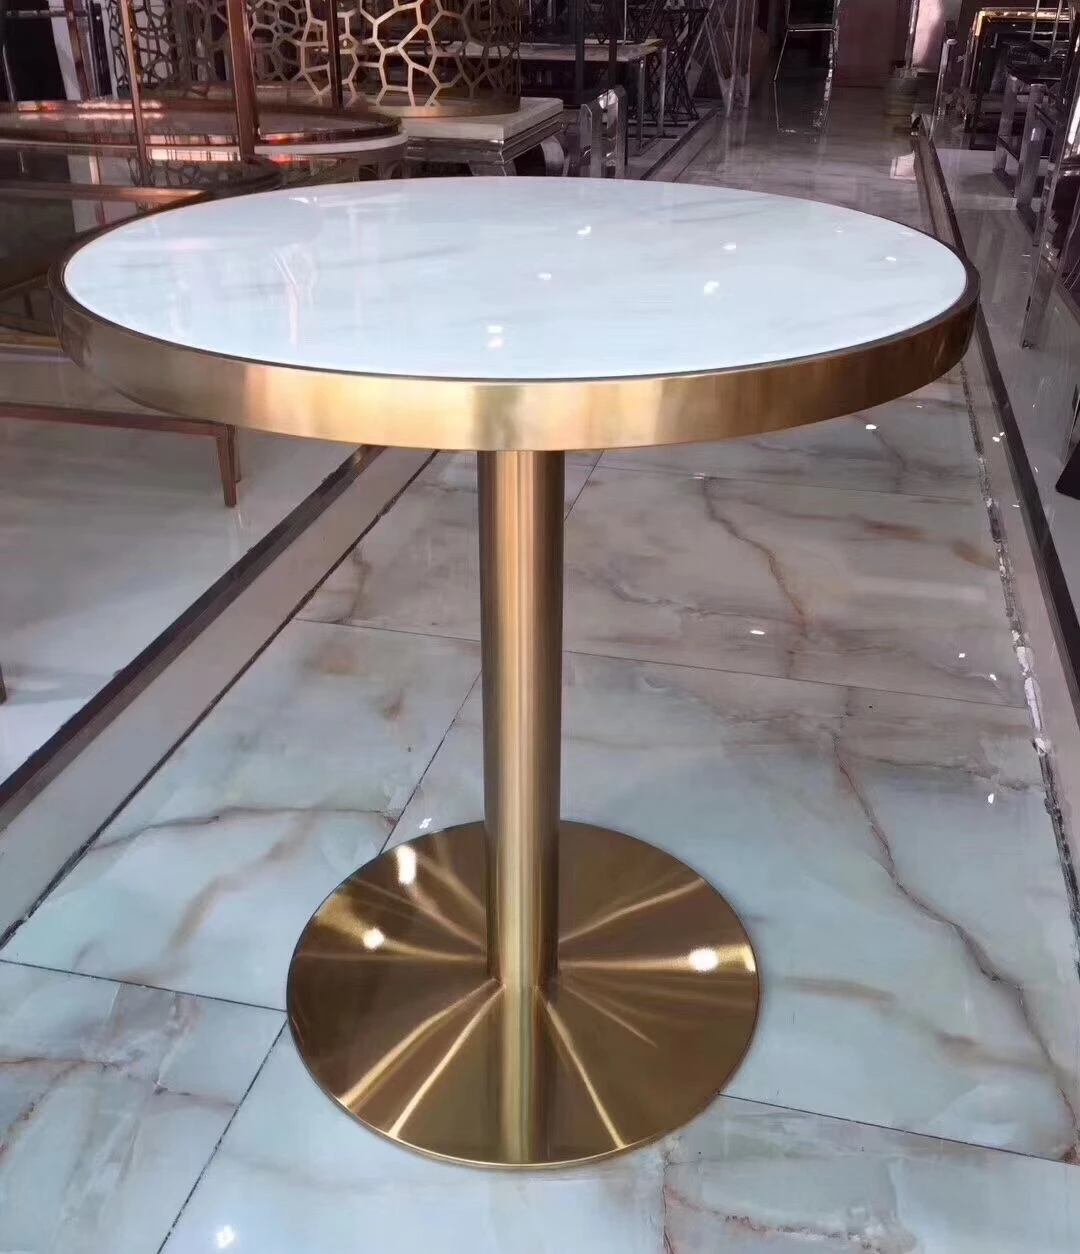 luxury design coffee table round marble top stainless steel leg living room center table metal high chat meeting table